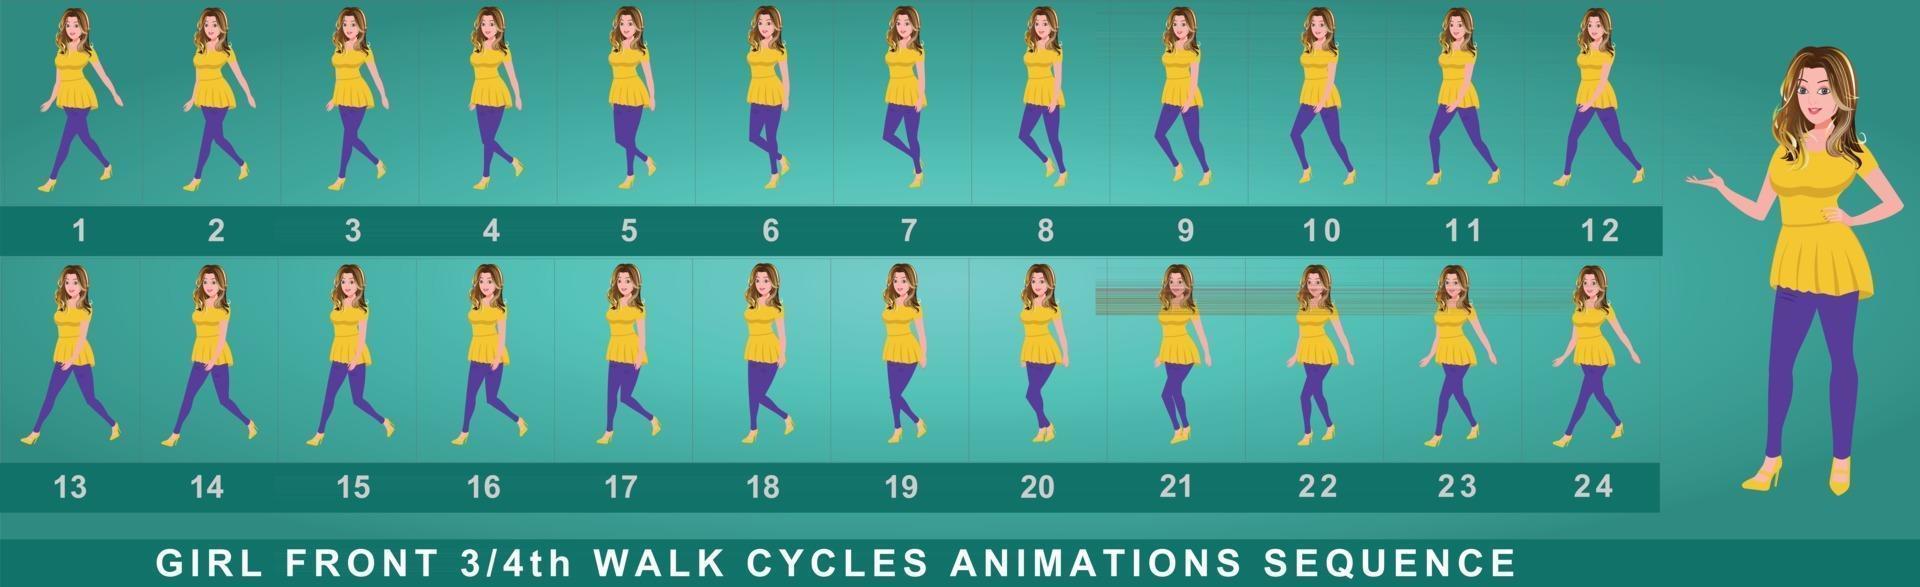 Girl Character Walk Cycle Animation Sequence vector